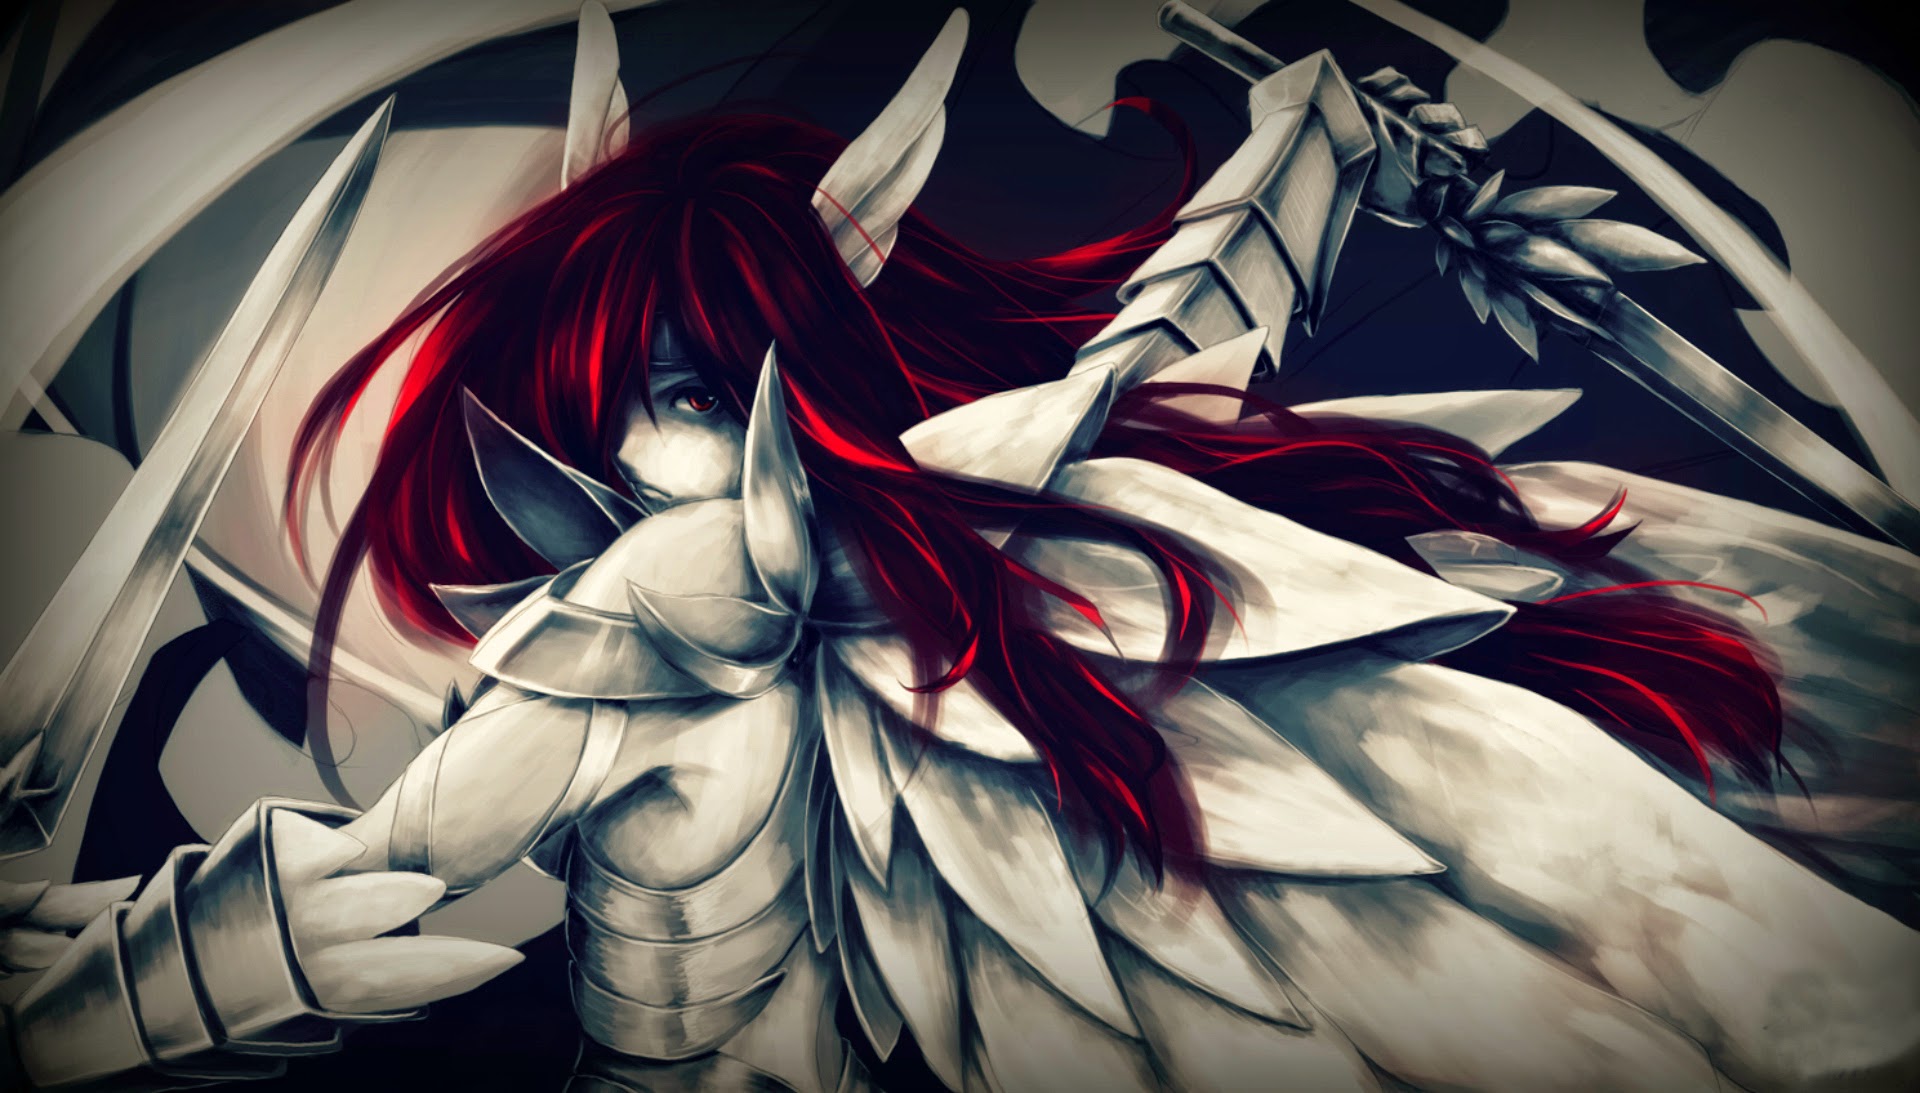 Fairy Tail Erza Wallpaper Hd Erza scarlet is an s class